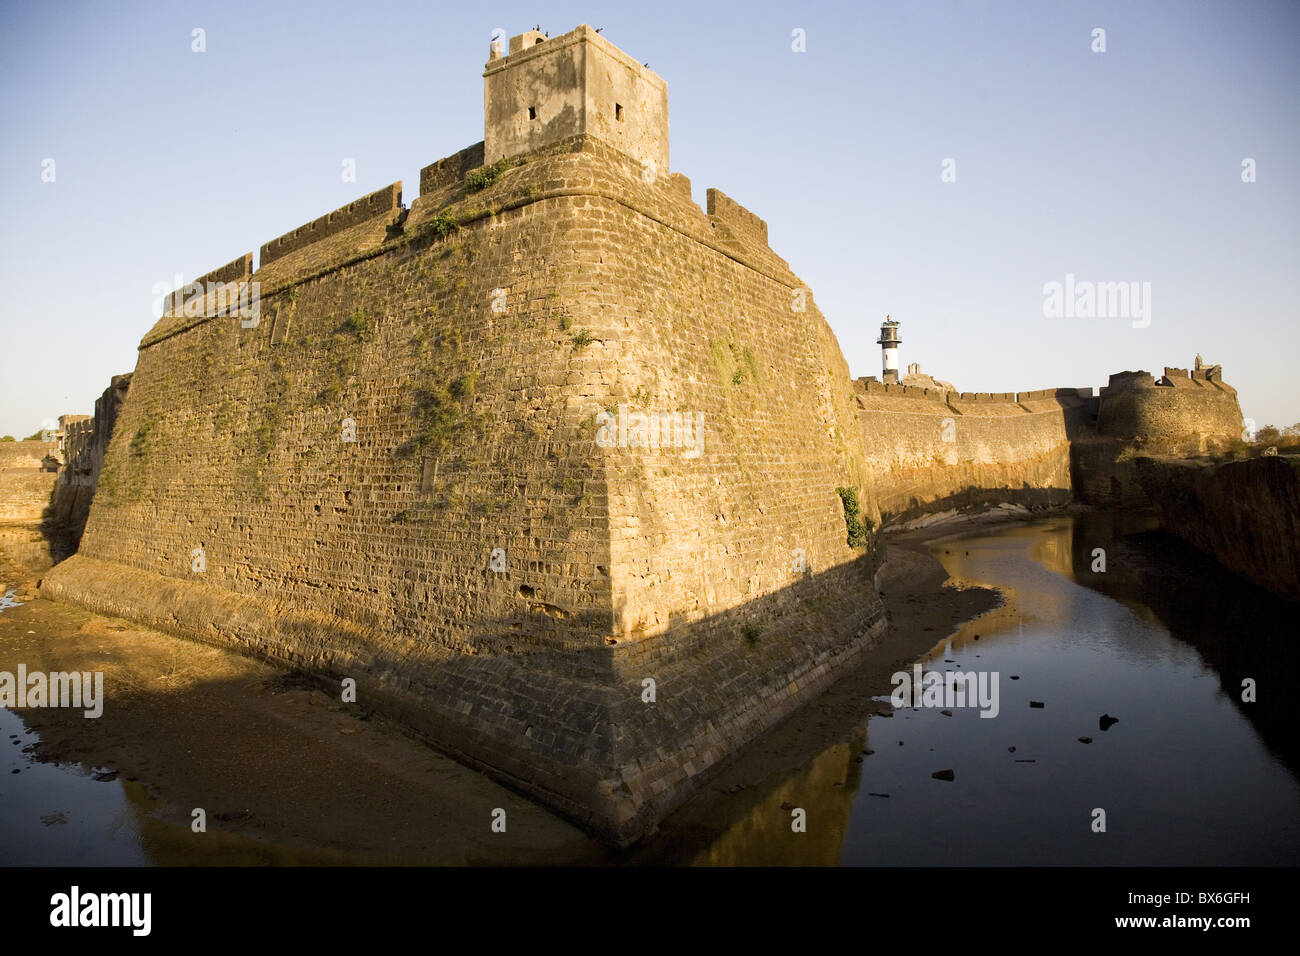 The walls and moat of the Fortress in the former Portuguese colony of Diu, Union Territory of Diu and Daman, India, Asia Stock Photo